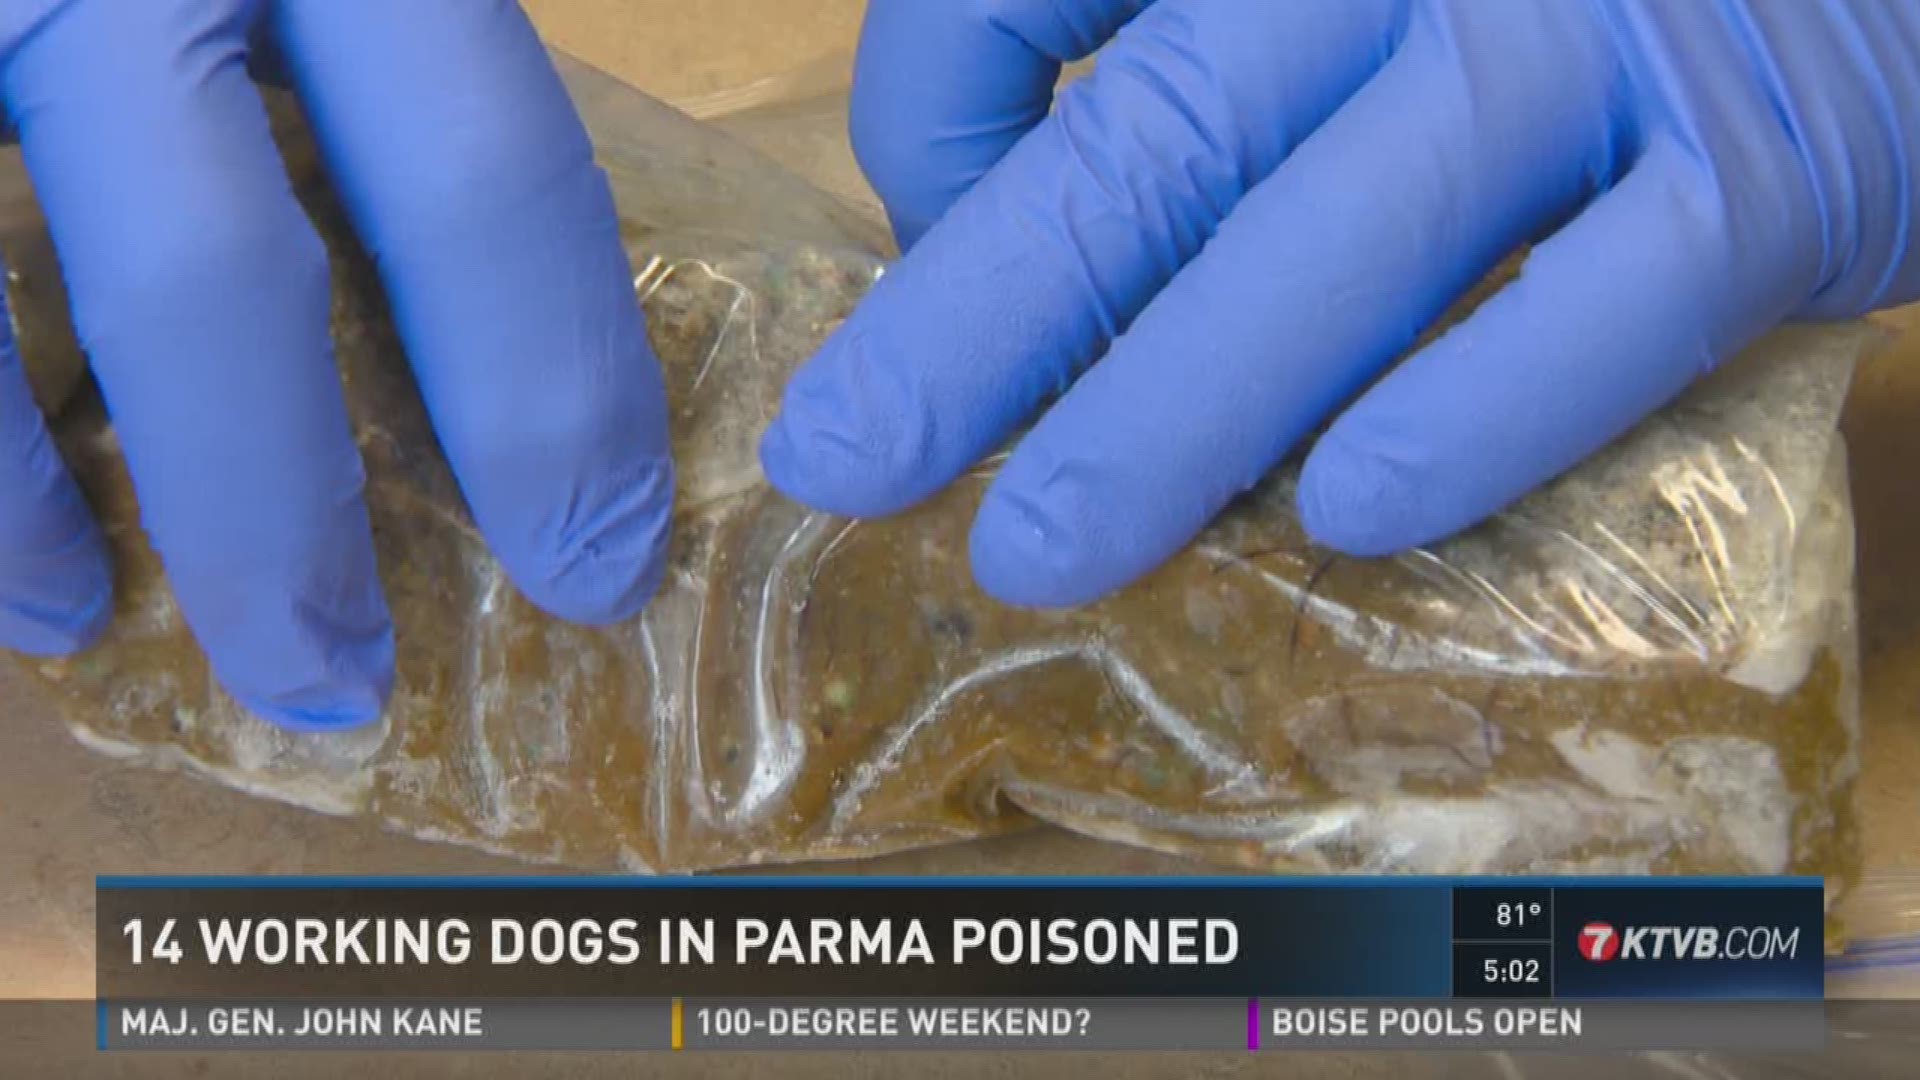 14 working dogs poisoned in Parma